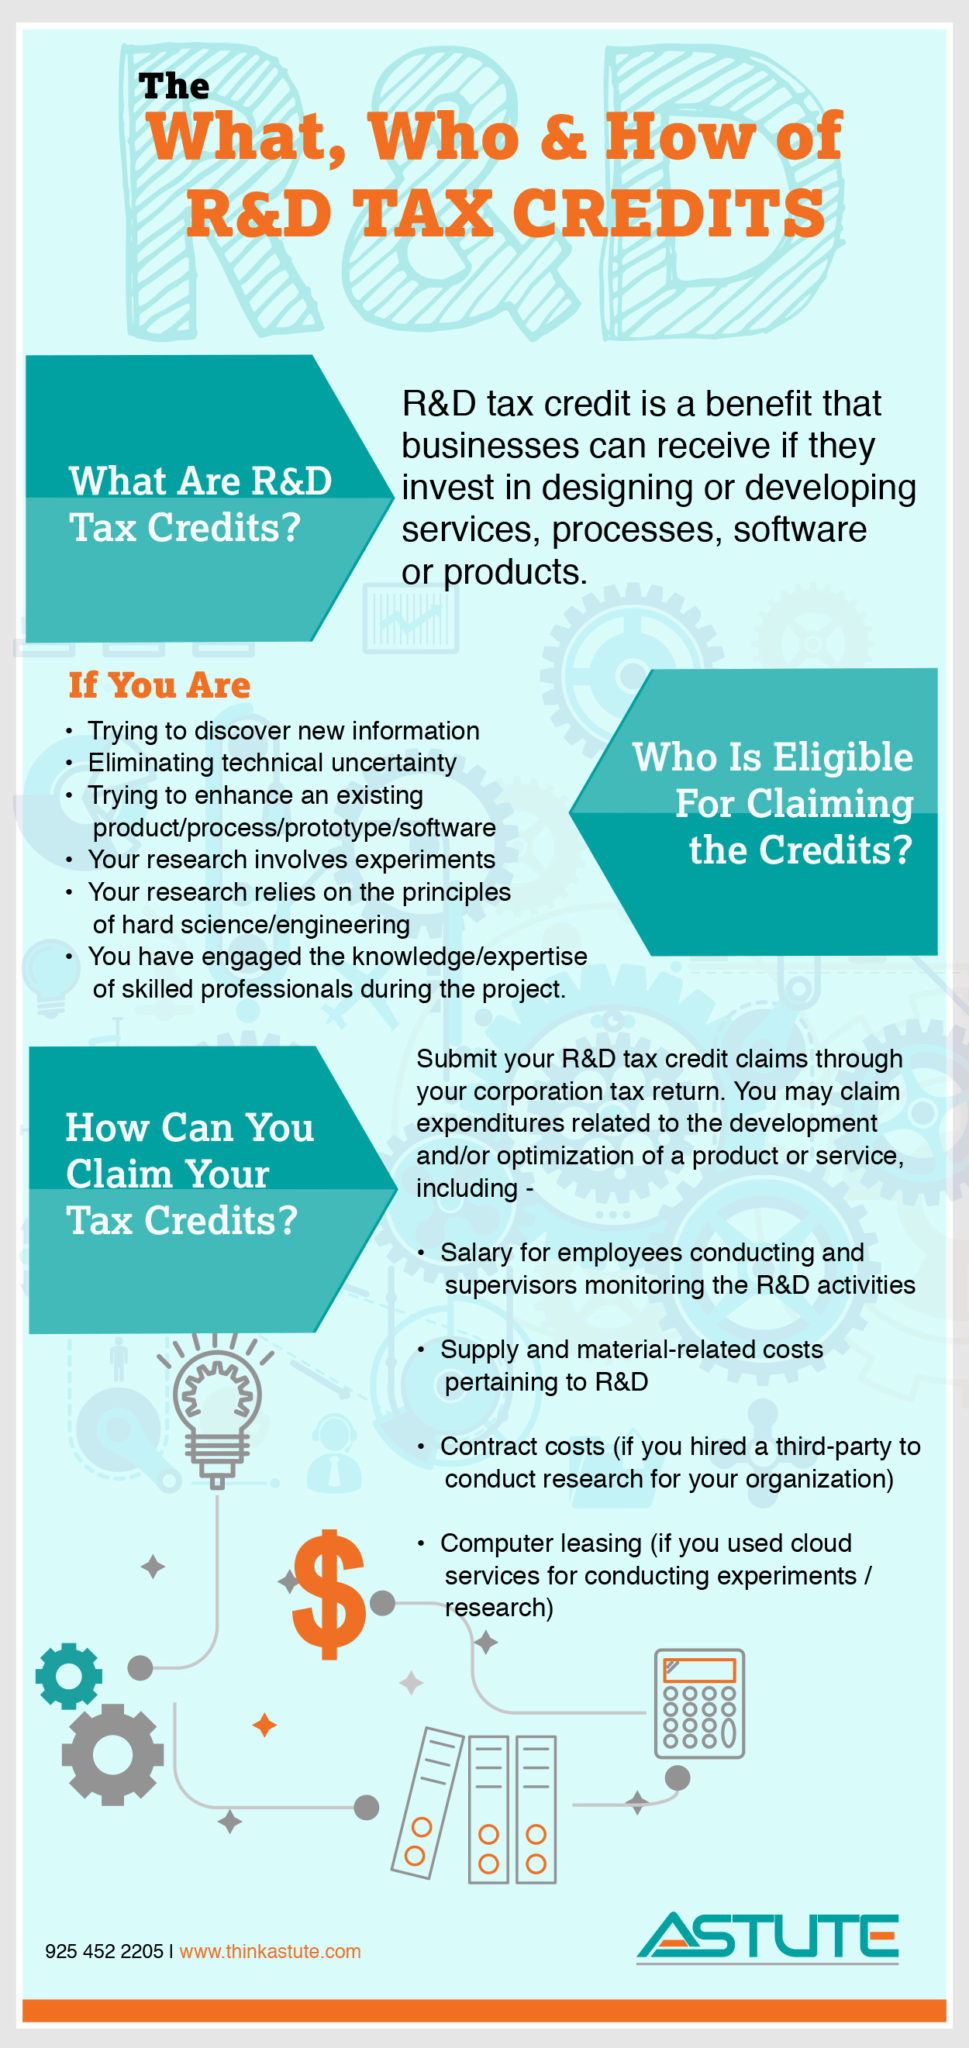 are-you-eligible-for-r-d-tax-credit-find-out-using-this-infographic